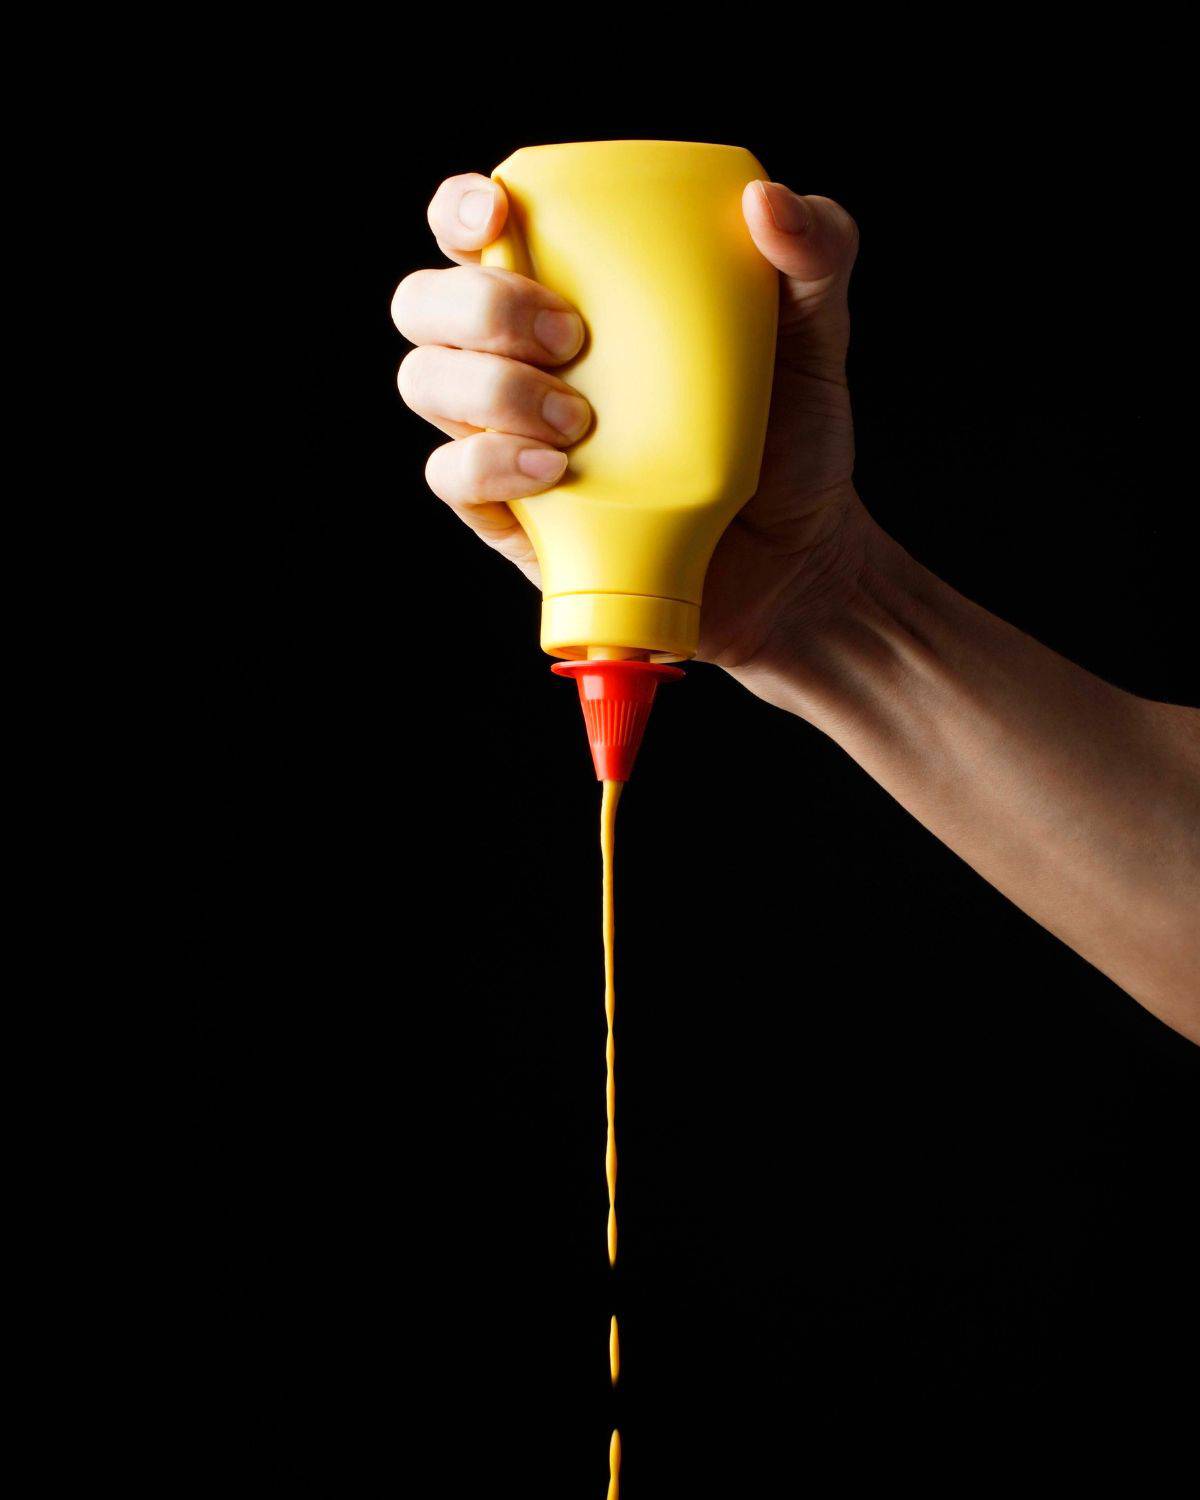 American mustard being squeezed out of a bottle.